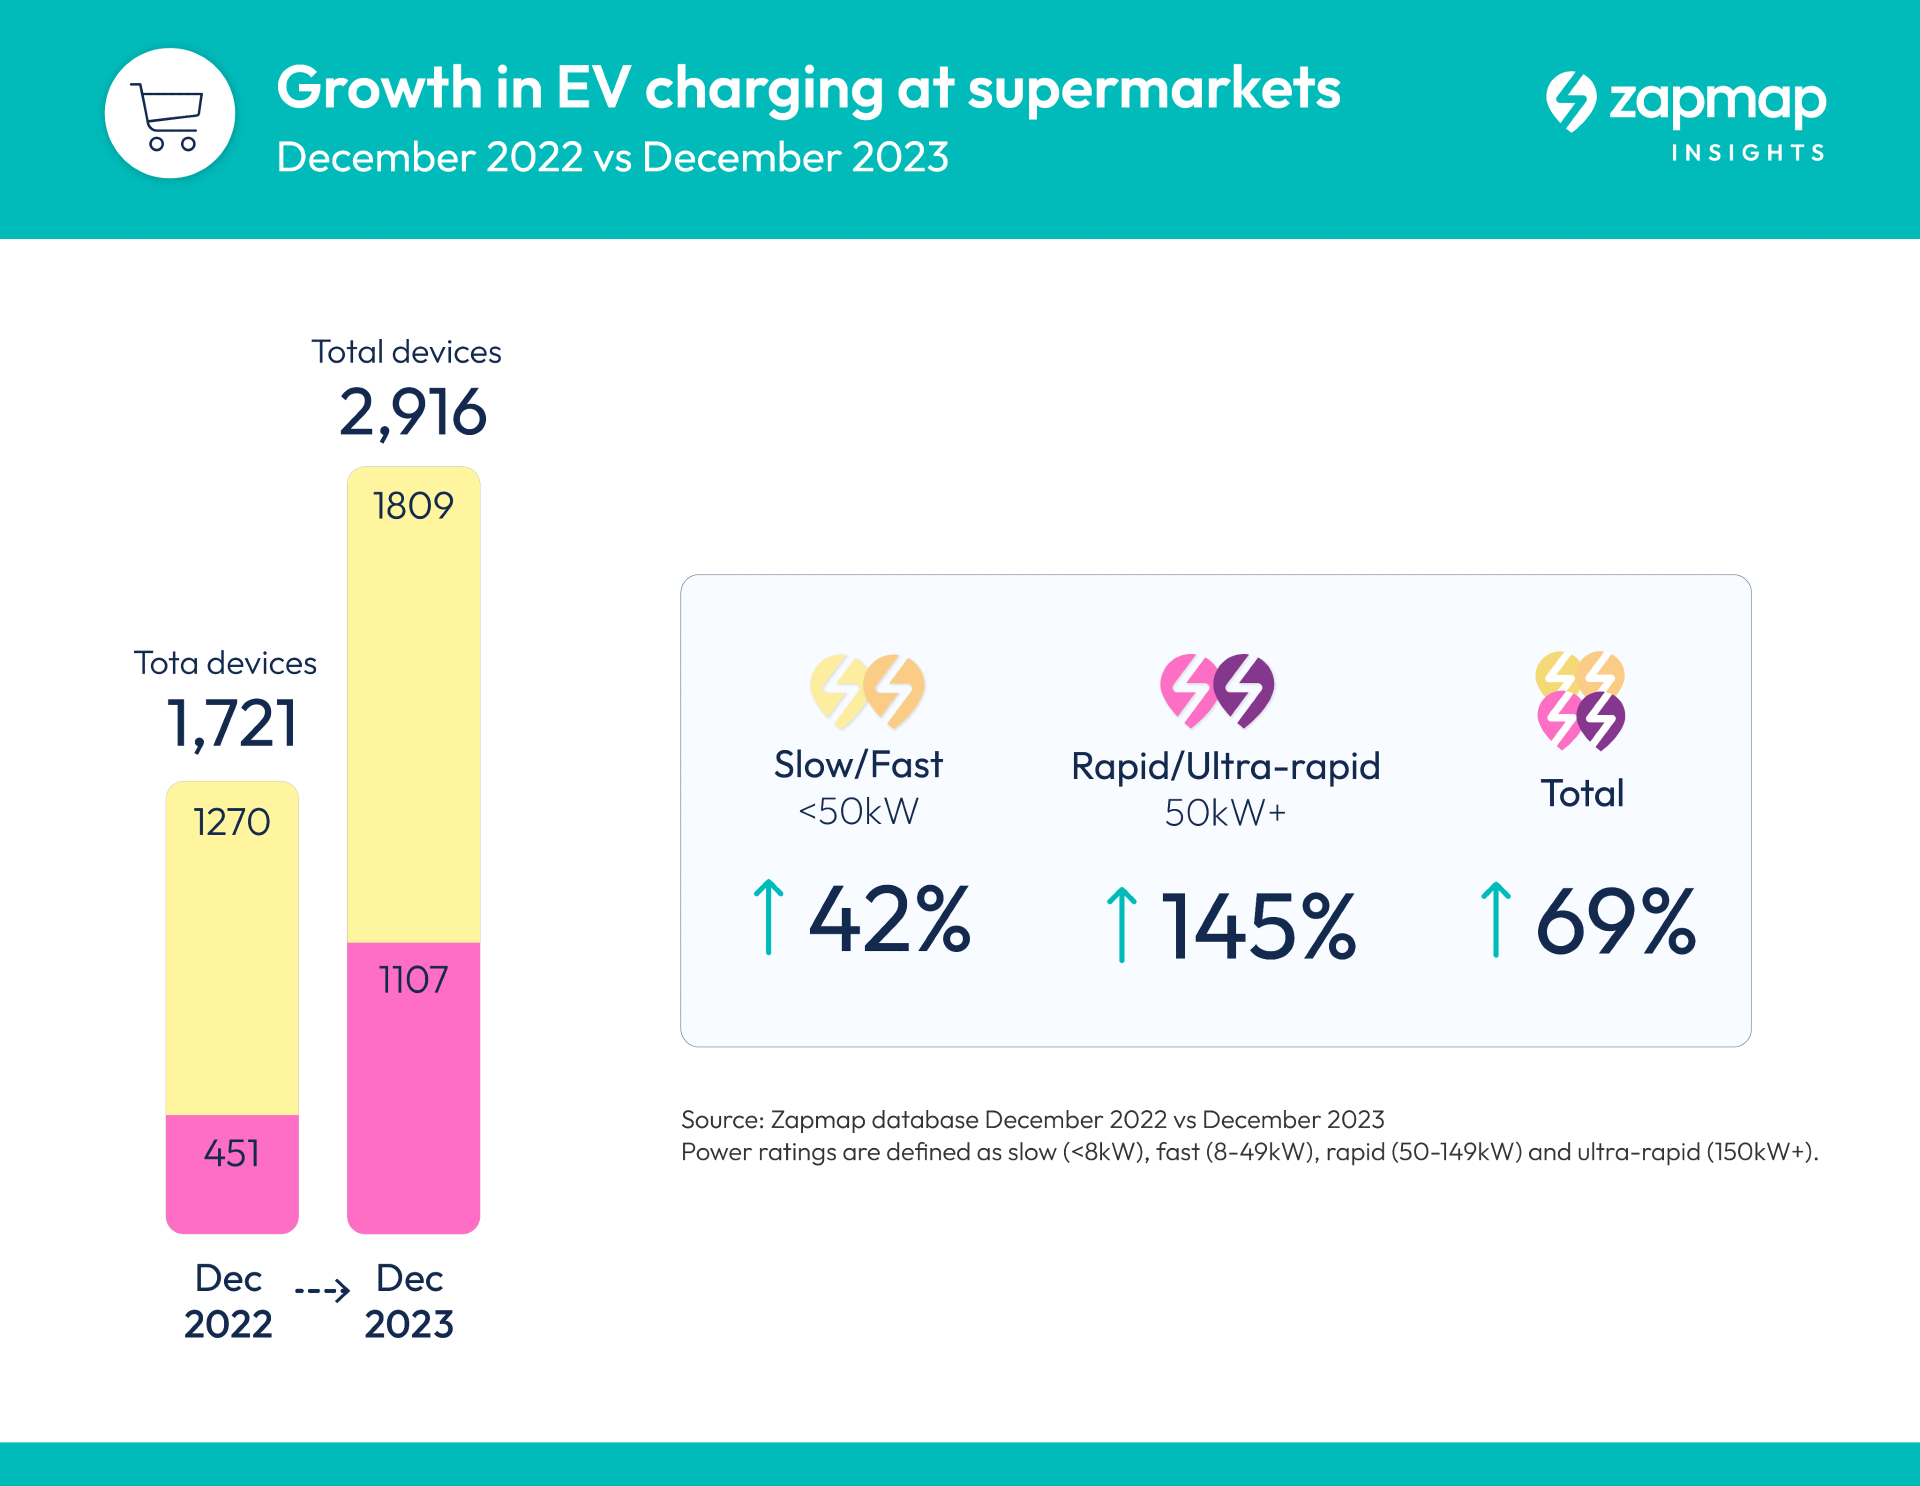 EV charging provision at supermarkets in 2023